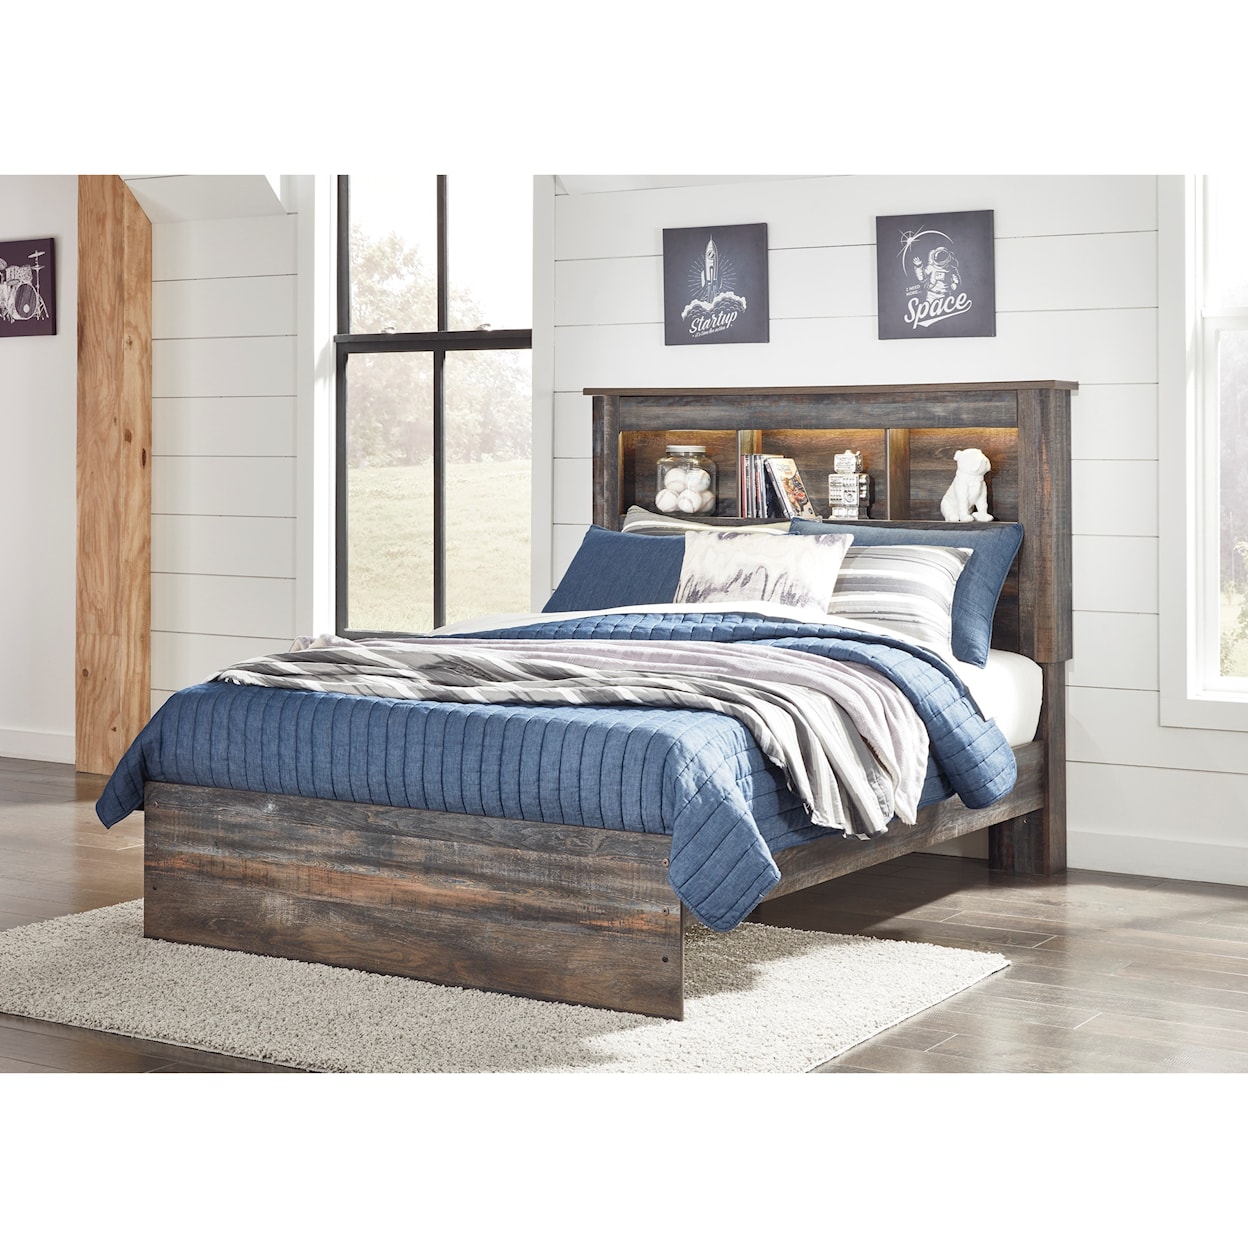 Signature Design by Ashley Baleigh King Bookcase Bed